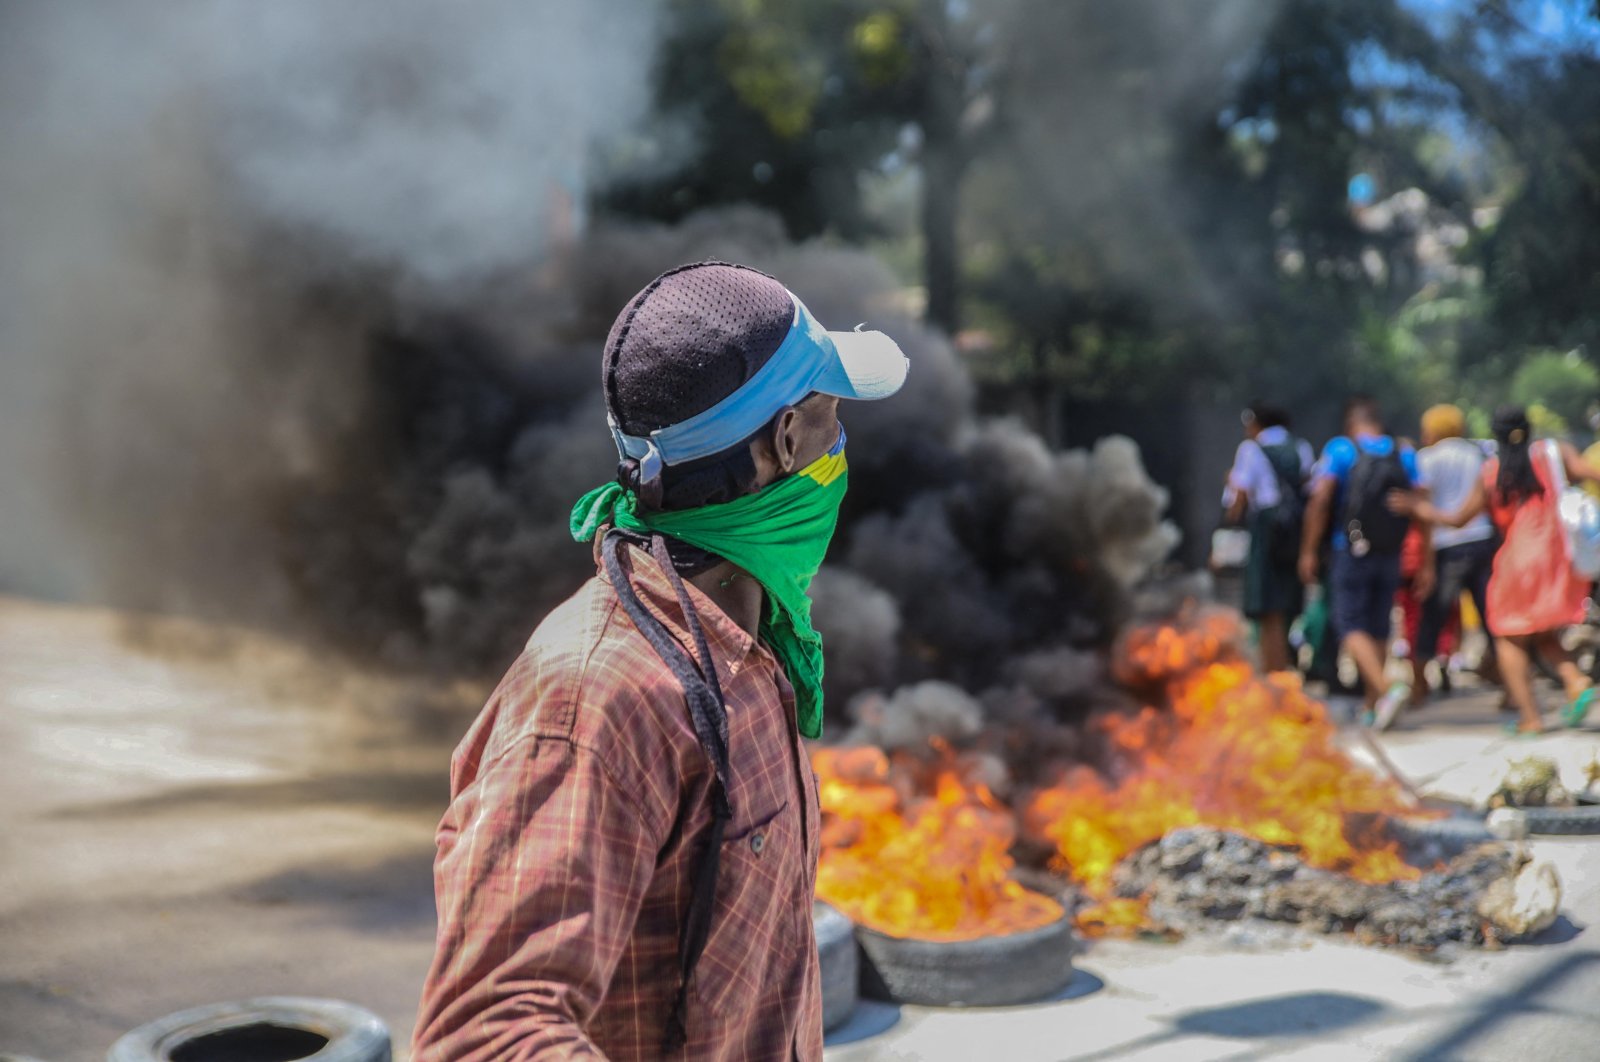 Blazing barricades burn after being set on fire by groups of motorcycle taxi drivers to protest against fuel shortages in Port-au-Prince, Haiti, Oct. 21, 2021. (AFP Photo)